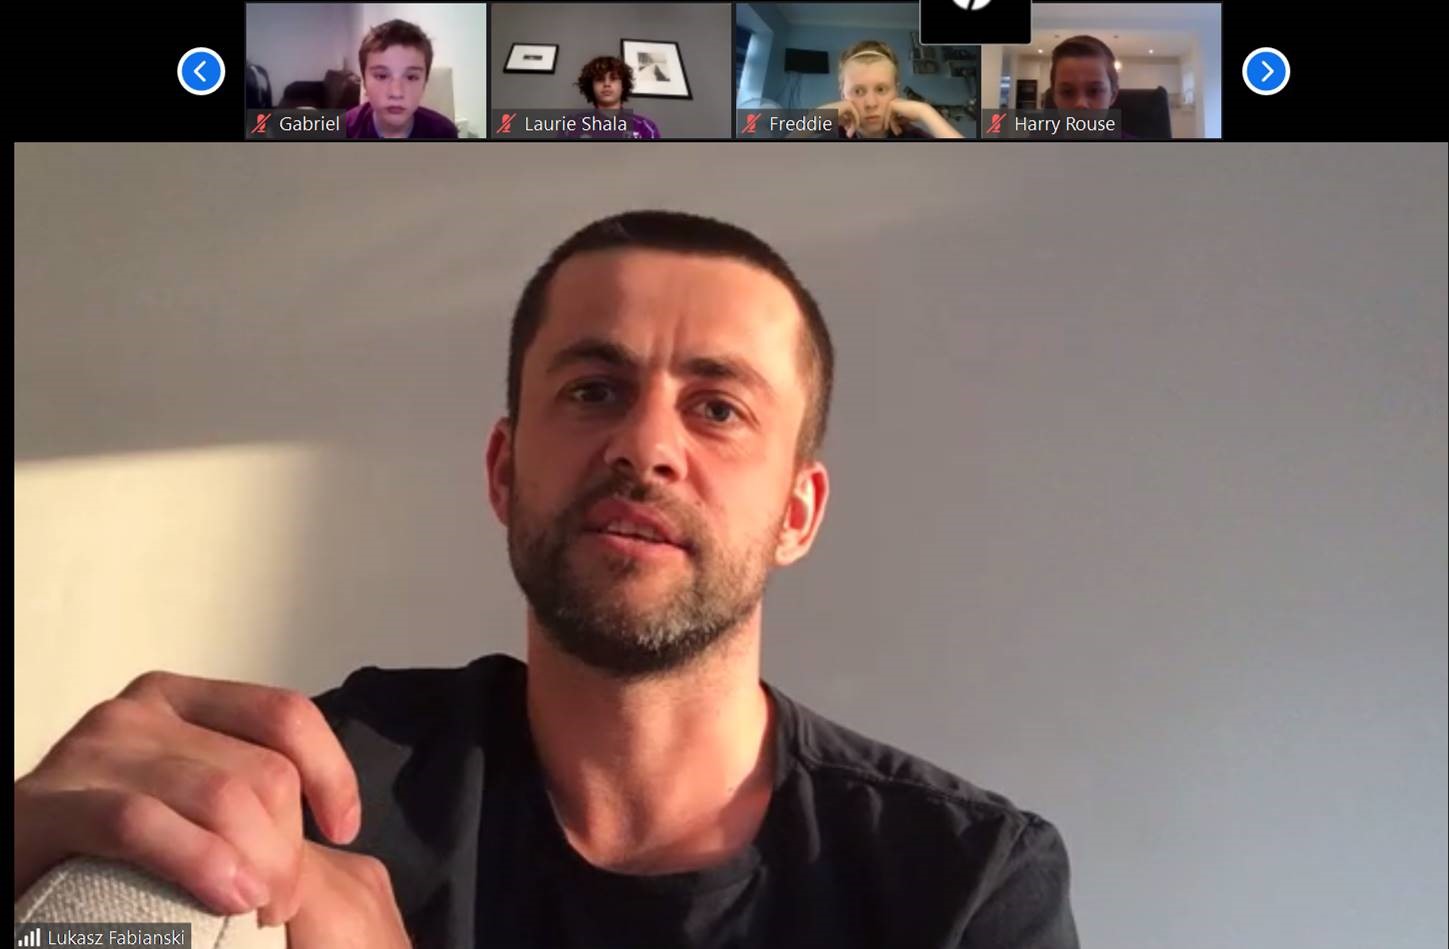 Lukasz Fabianski holds a video conference call with Academy goalkeepers